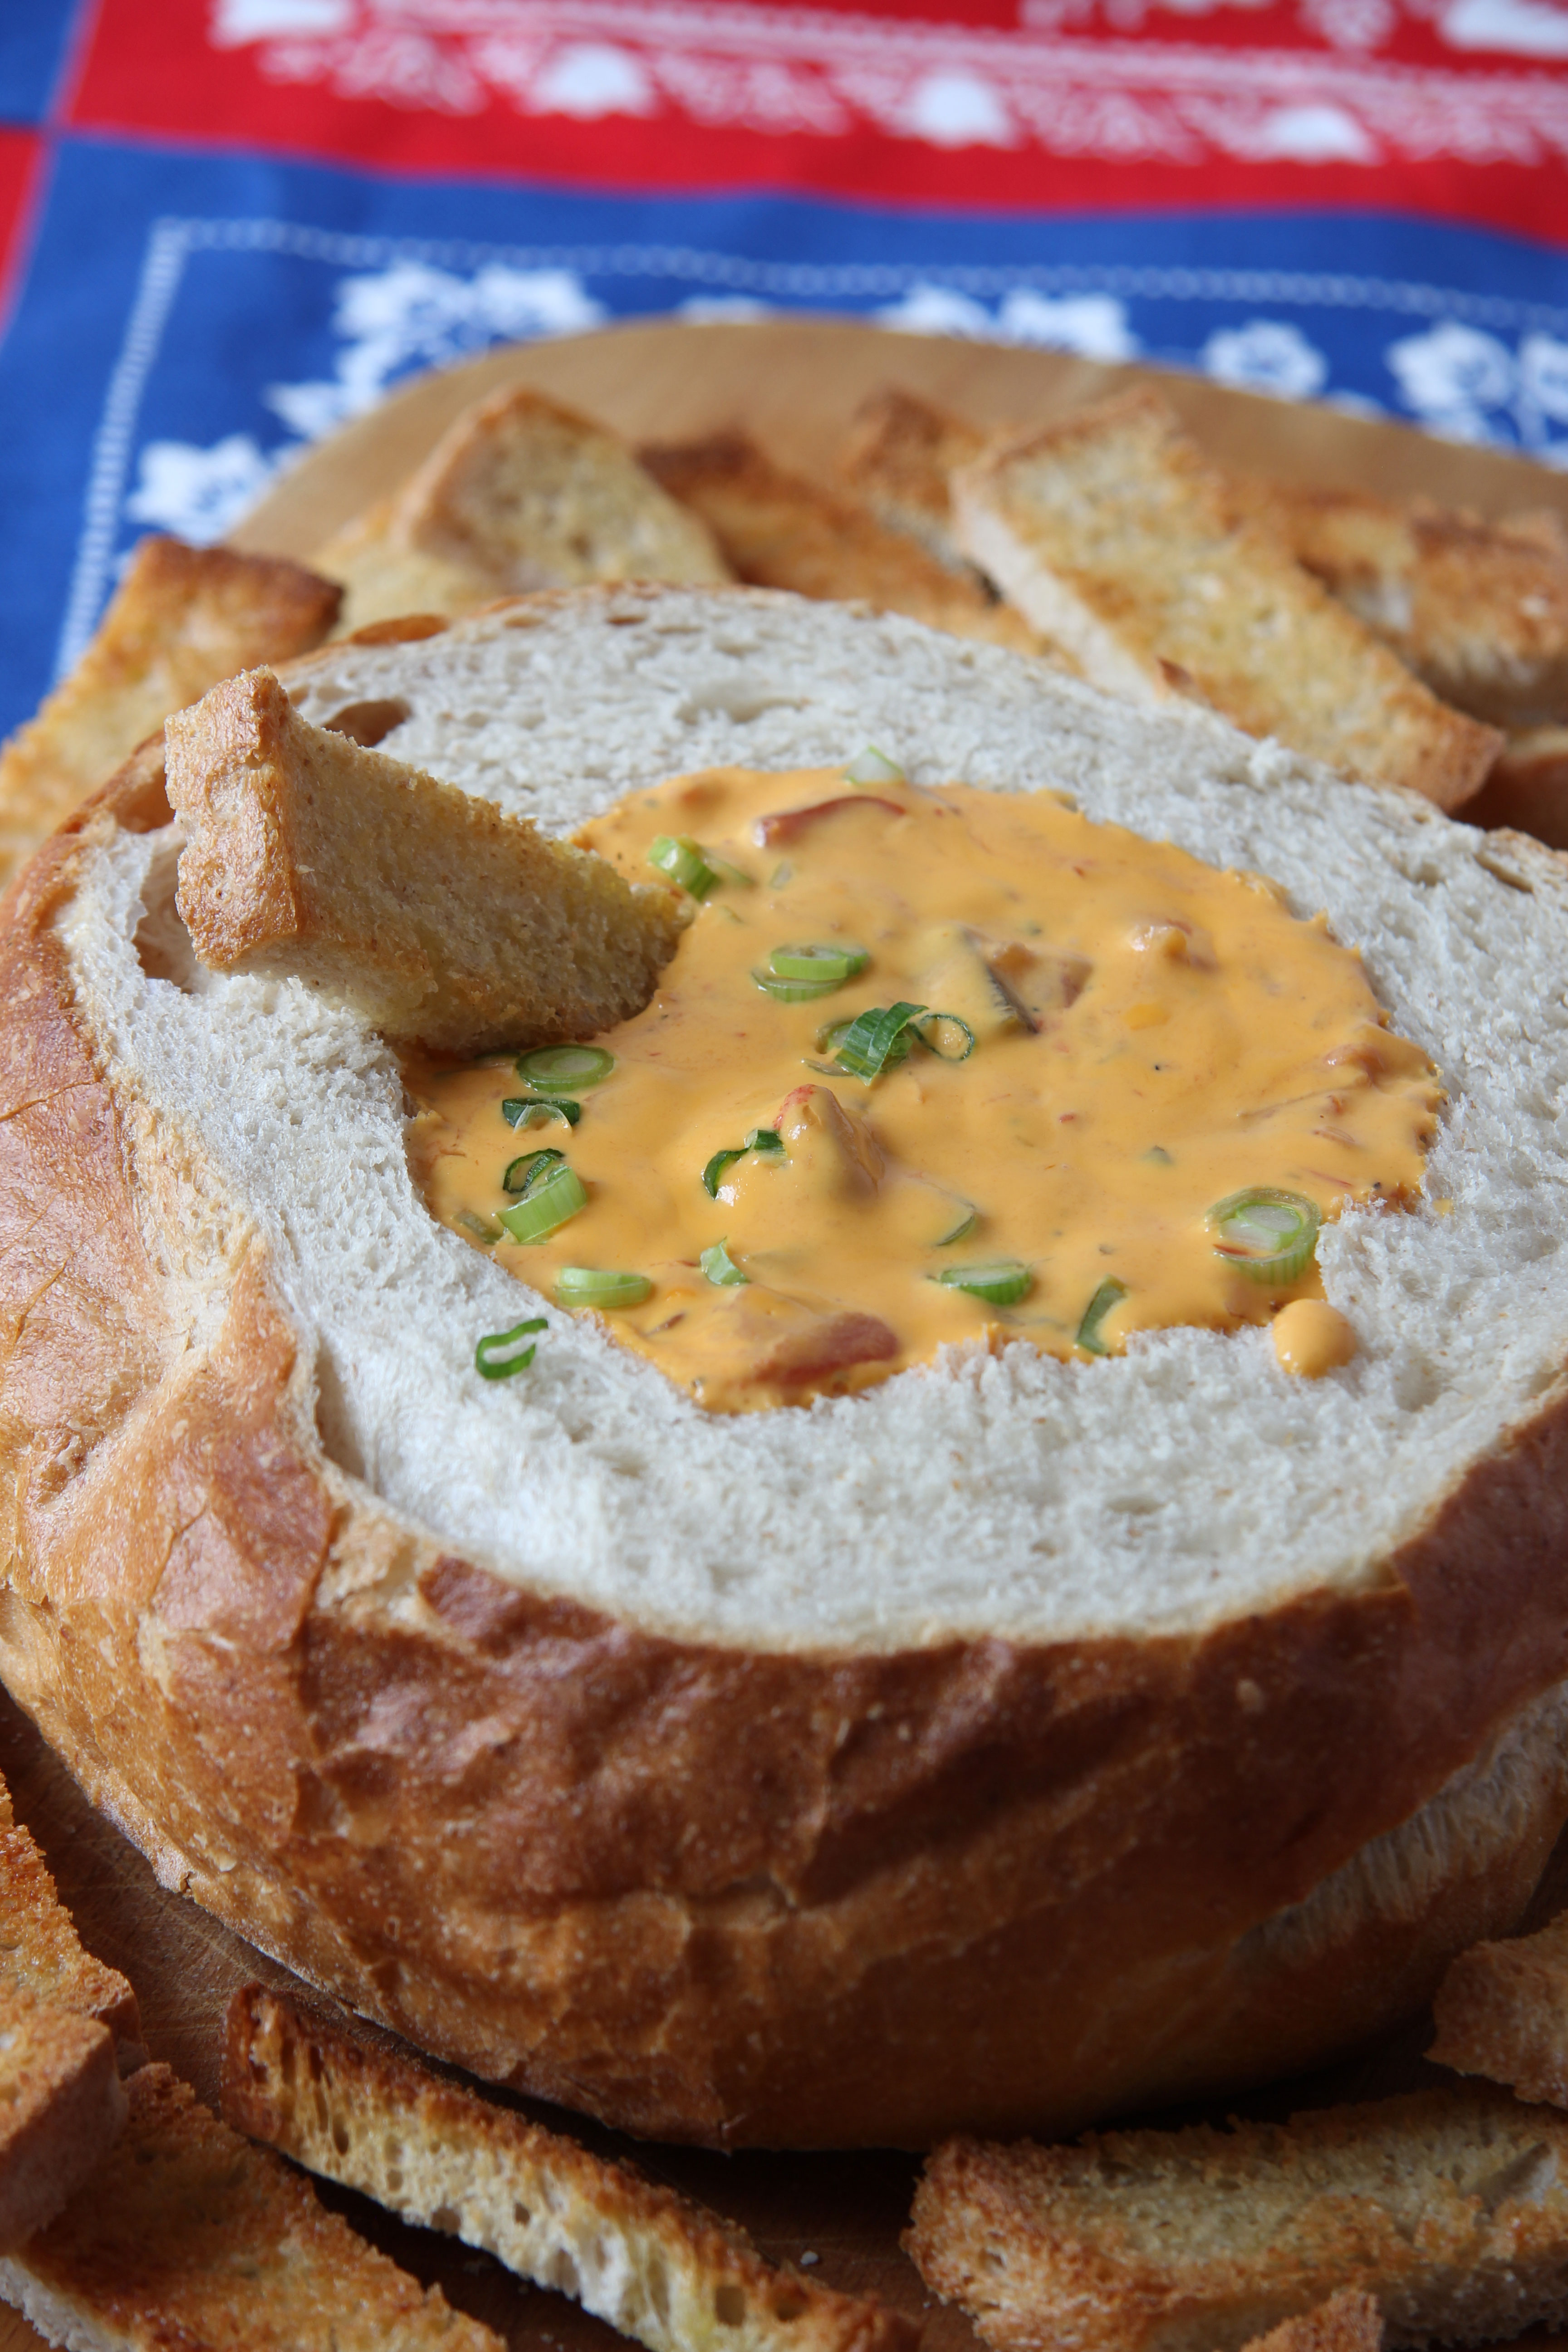 Make this gooey, cheesy nacho dip that features RAGU Double Cheddar Cheese Sauce. Put it in a scooped out bread bowl and dip with toasted bread fingers!